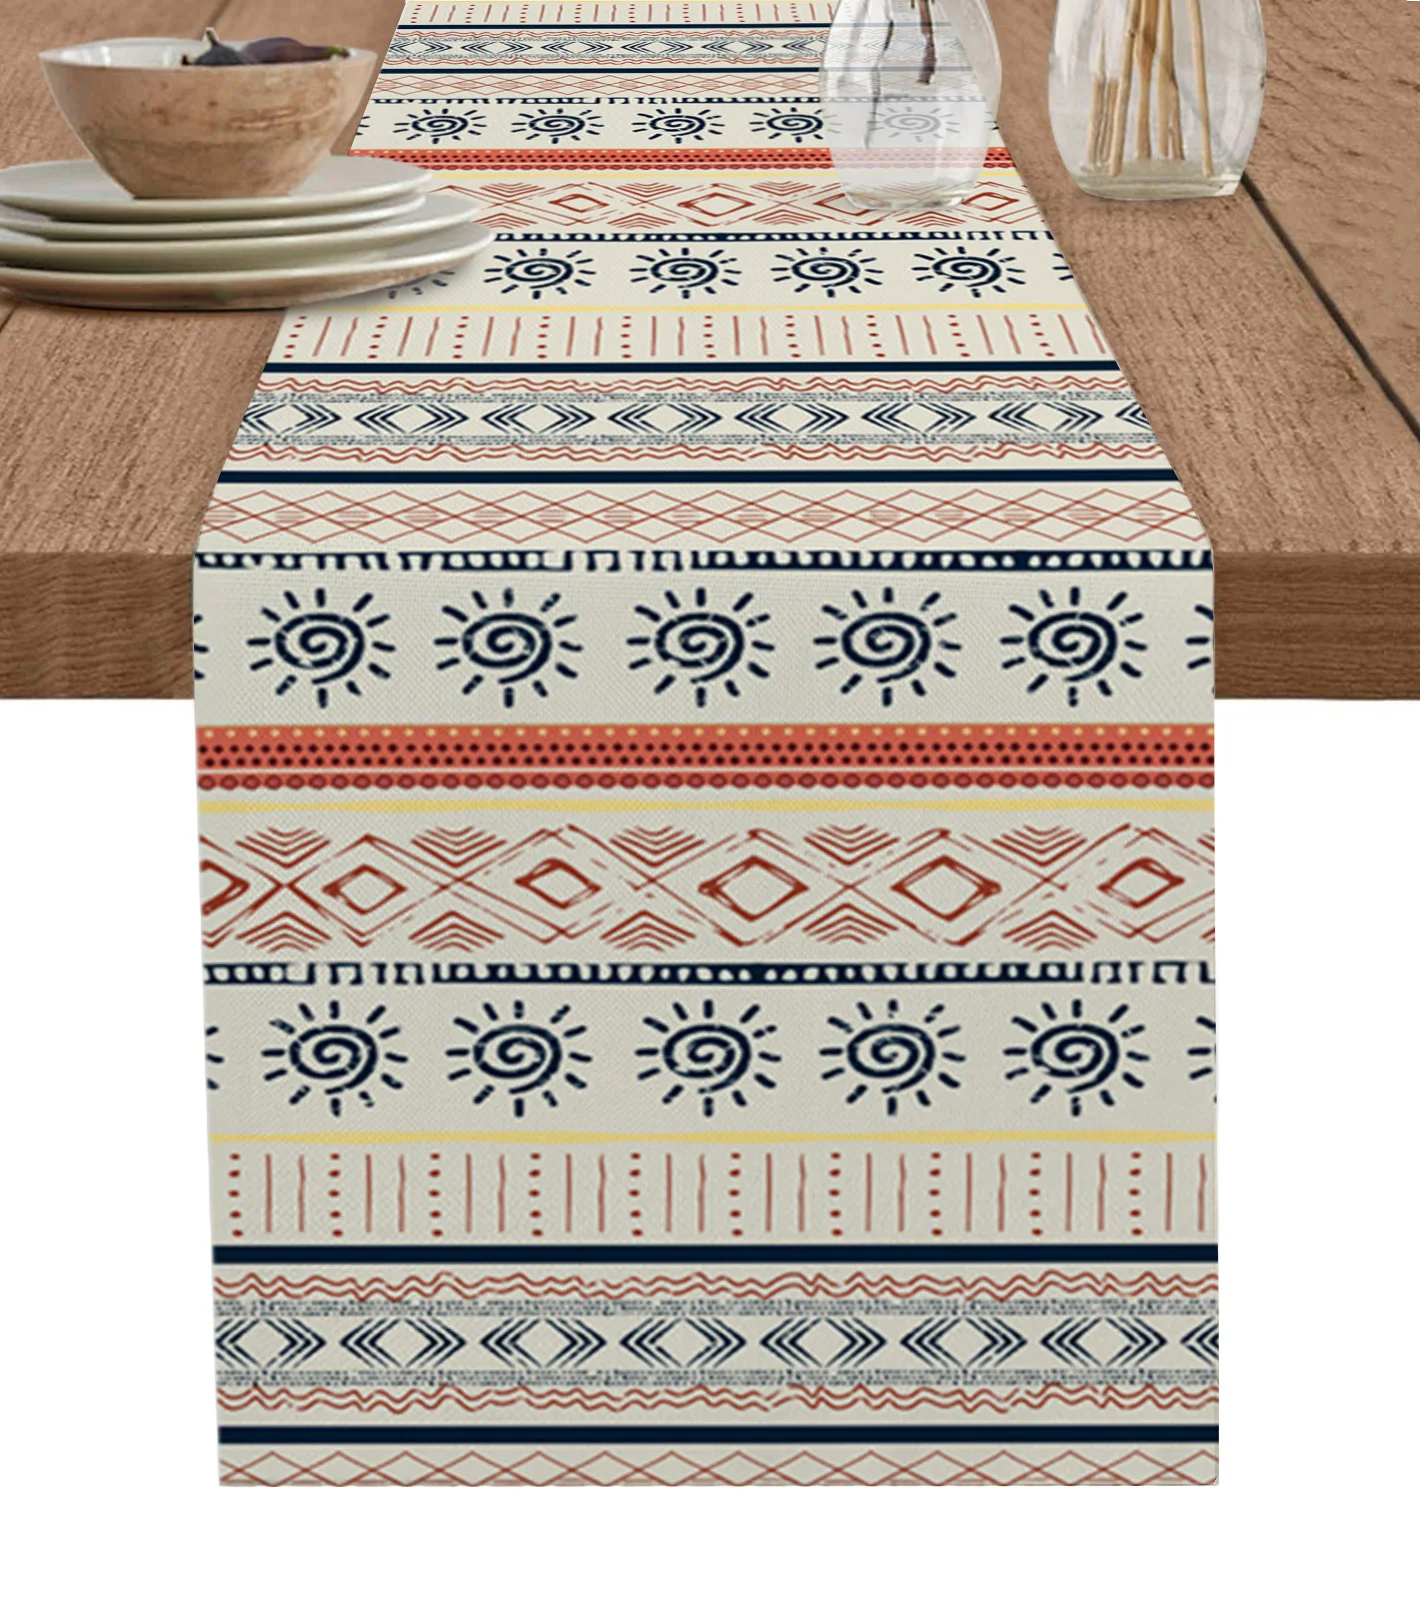 

Indian Lines Hand-Painted Table Runner Wedding Decor Table Cover Holiday Party Coffee Table Decoration Table Cloth